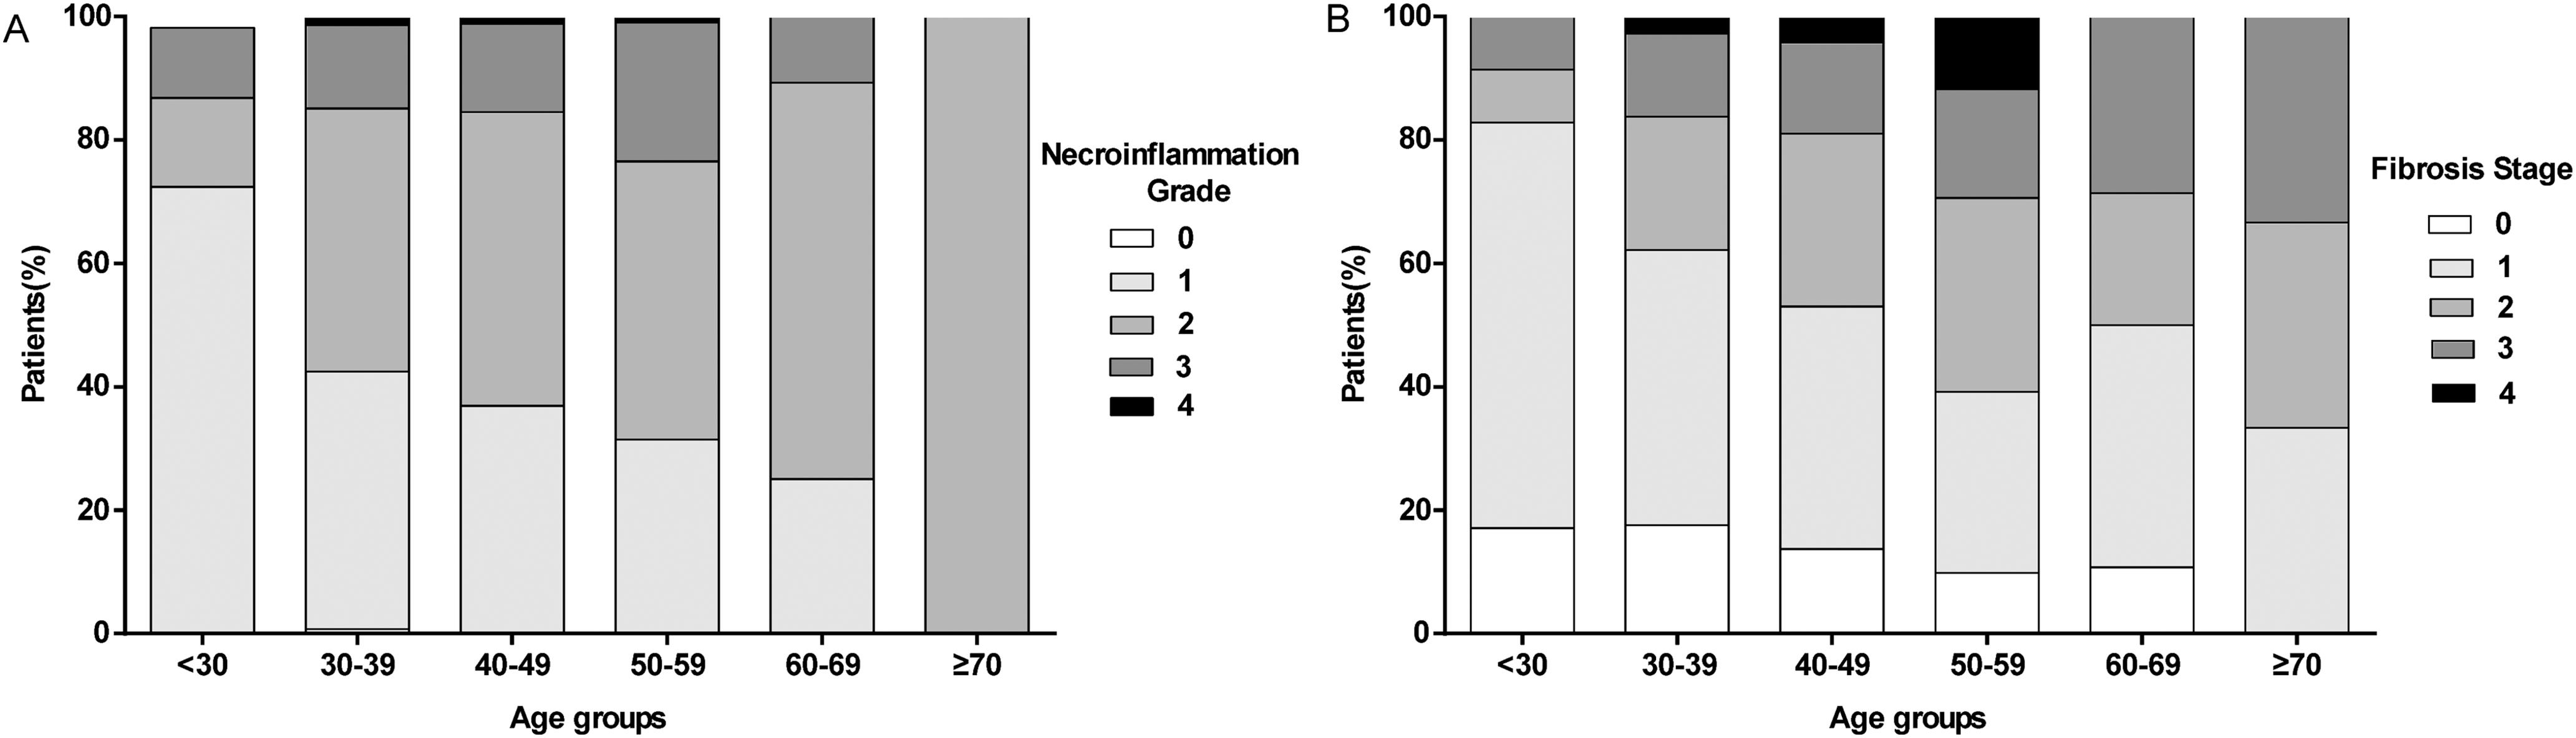 Distribution of (A) the necroinflammation grade and (B) fibrosis stage in 485 patients.